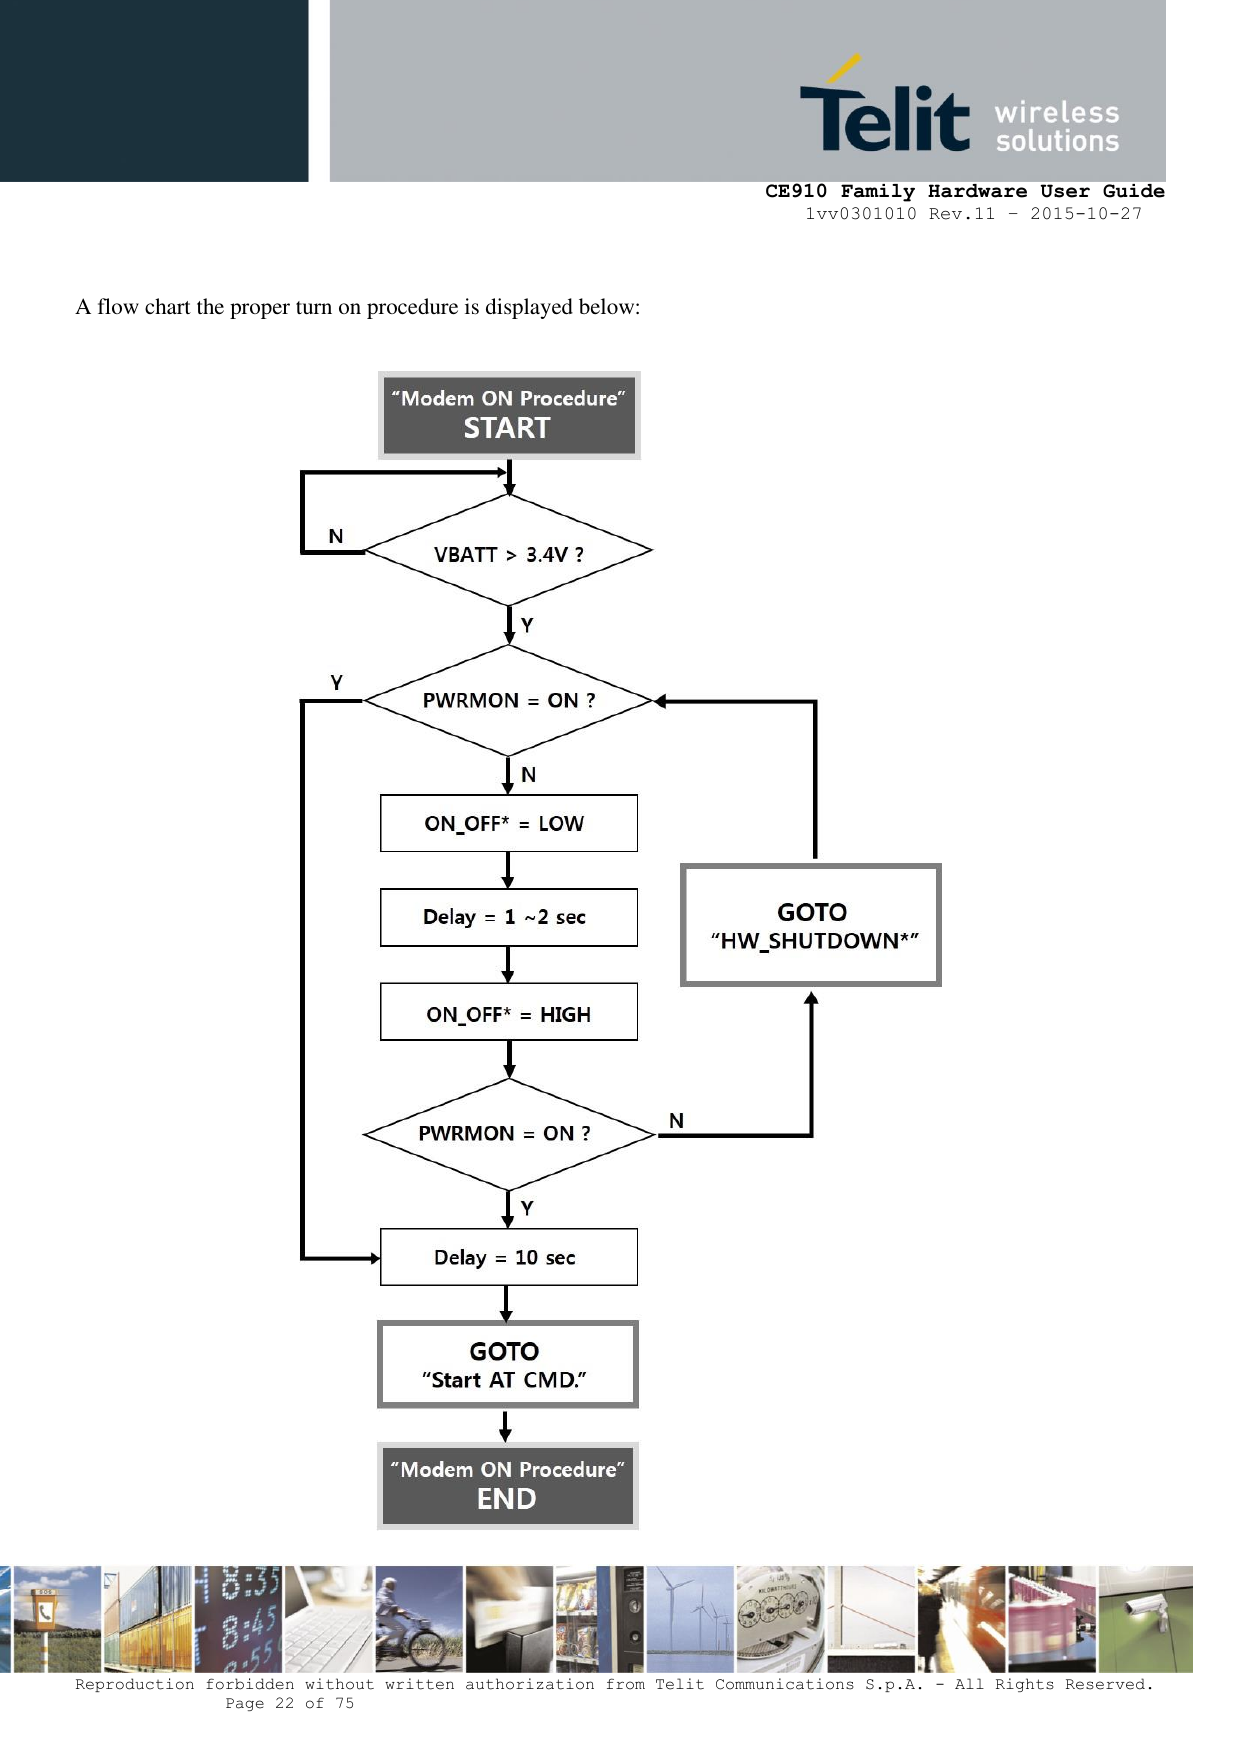     CE910 Family Hardware User Guide 1vv0301010 Rev.11 – 2015-10-27 Reproduction forbidden without written authorization from Telit Communications S.p.A. - All Rights Reserved.    Page 22 of 75                                                      A flow chart the proper turn on procedure is displayed below:   